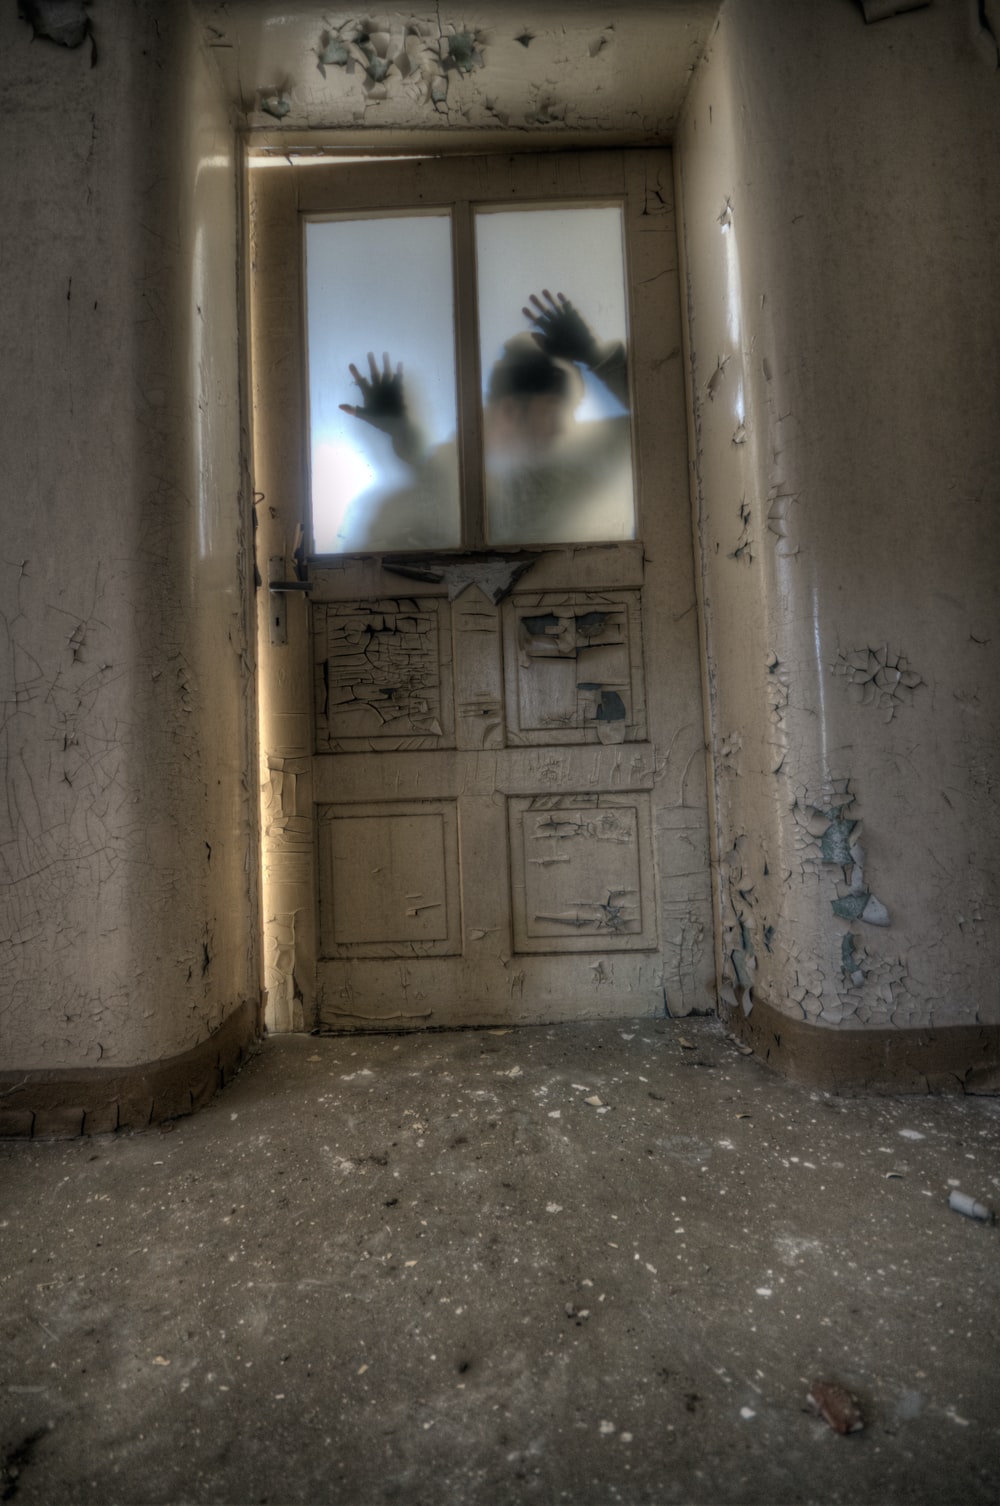 Scary Door Picture. Download Free Image